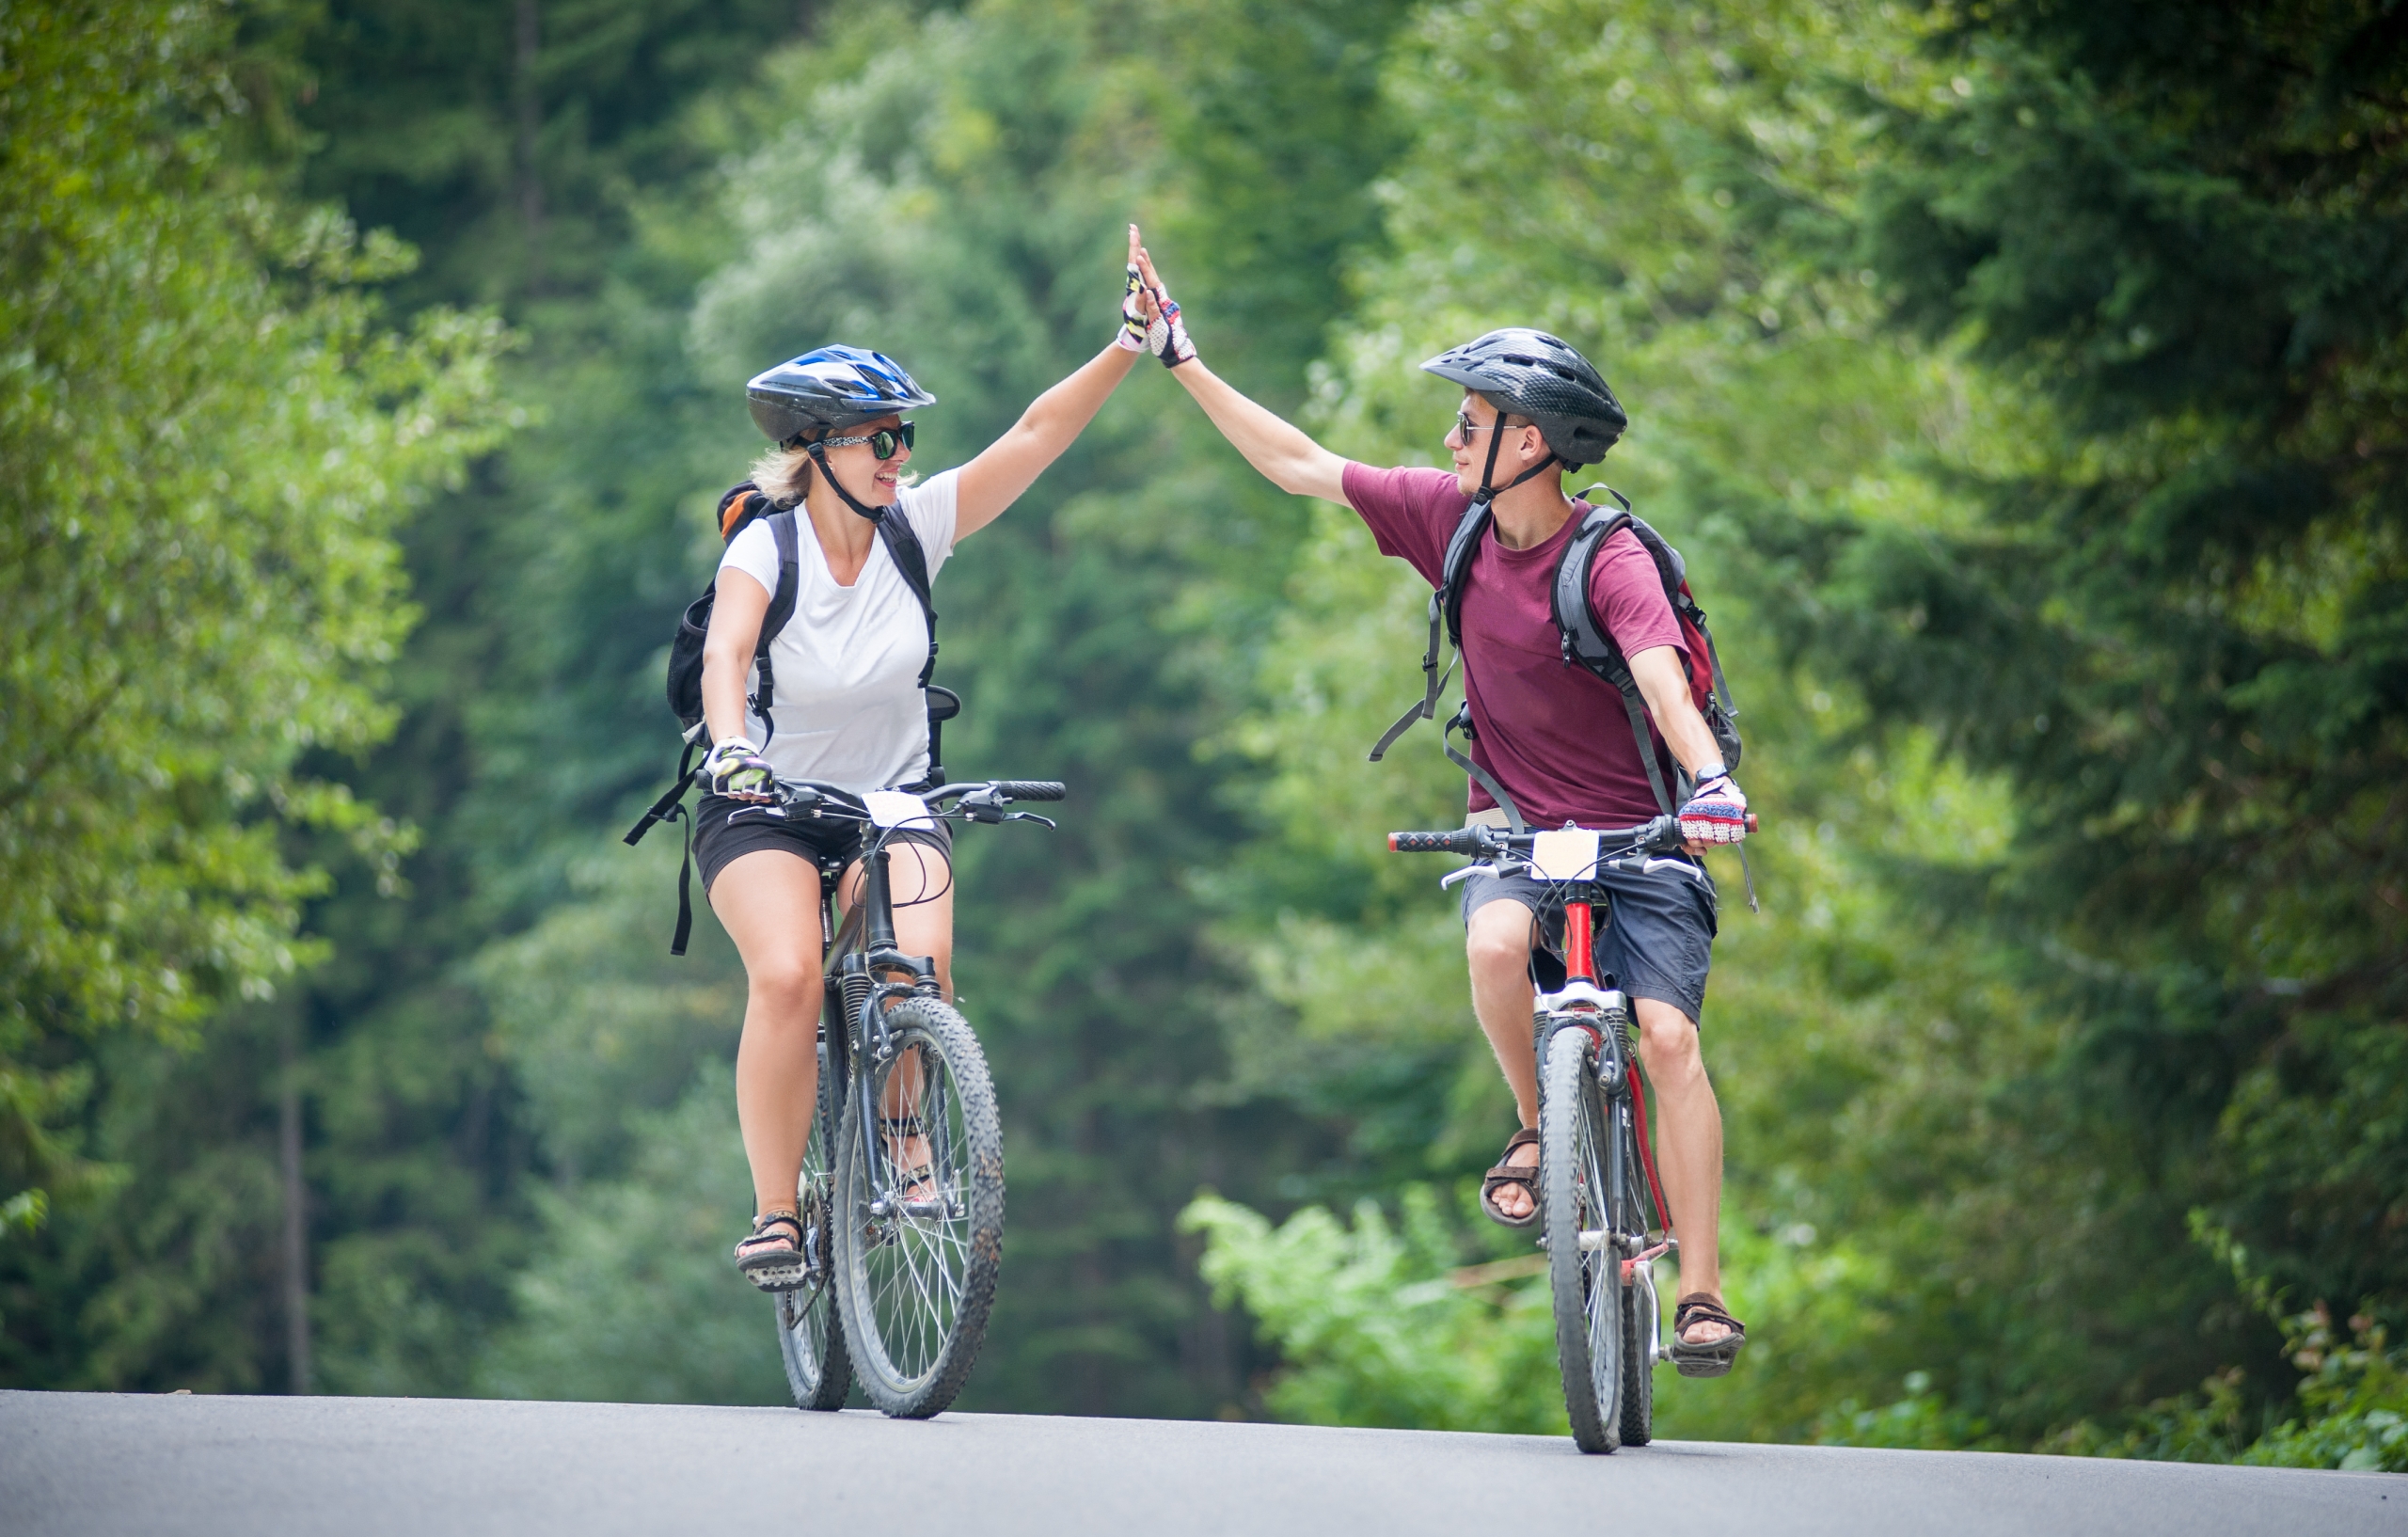 a male and a female on seperate bicycles slapping their hands together both smiling at eachother riding down a road with forest surroundings